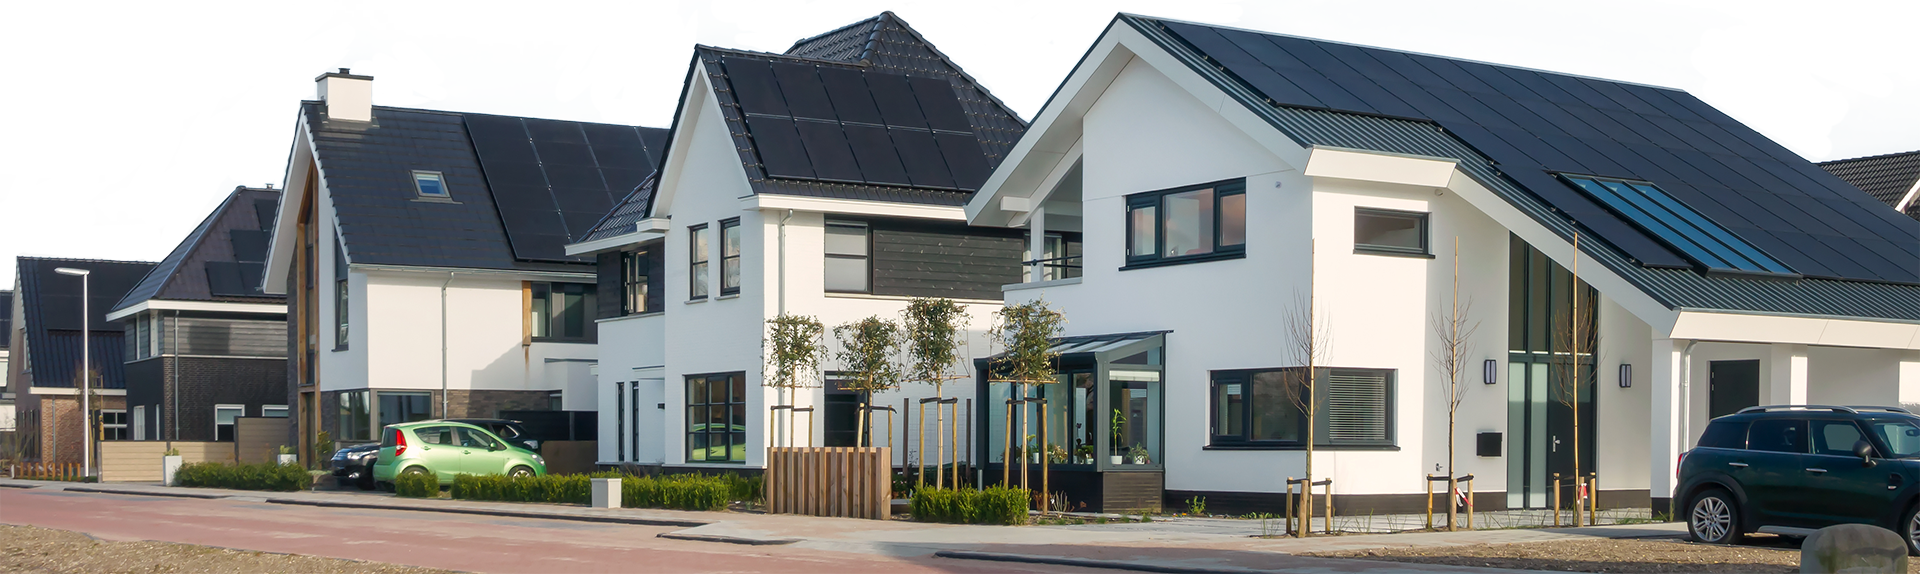 row of homes with solar panel systems on roof